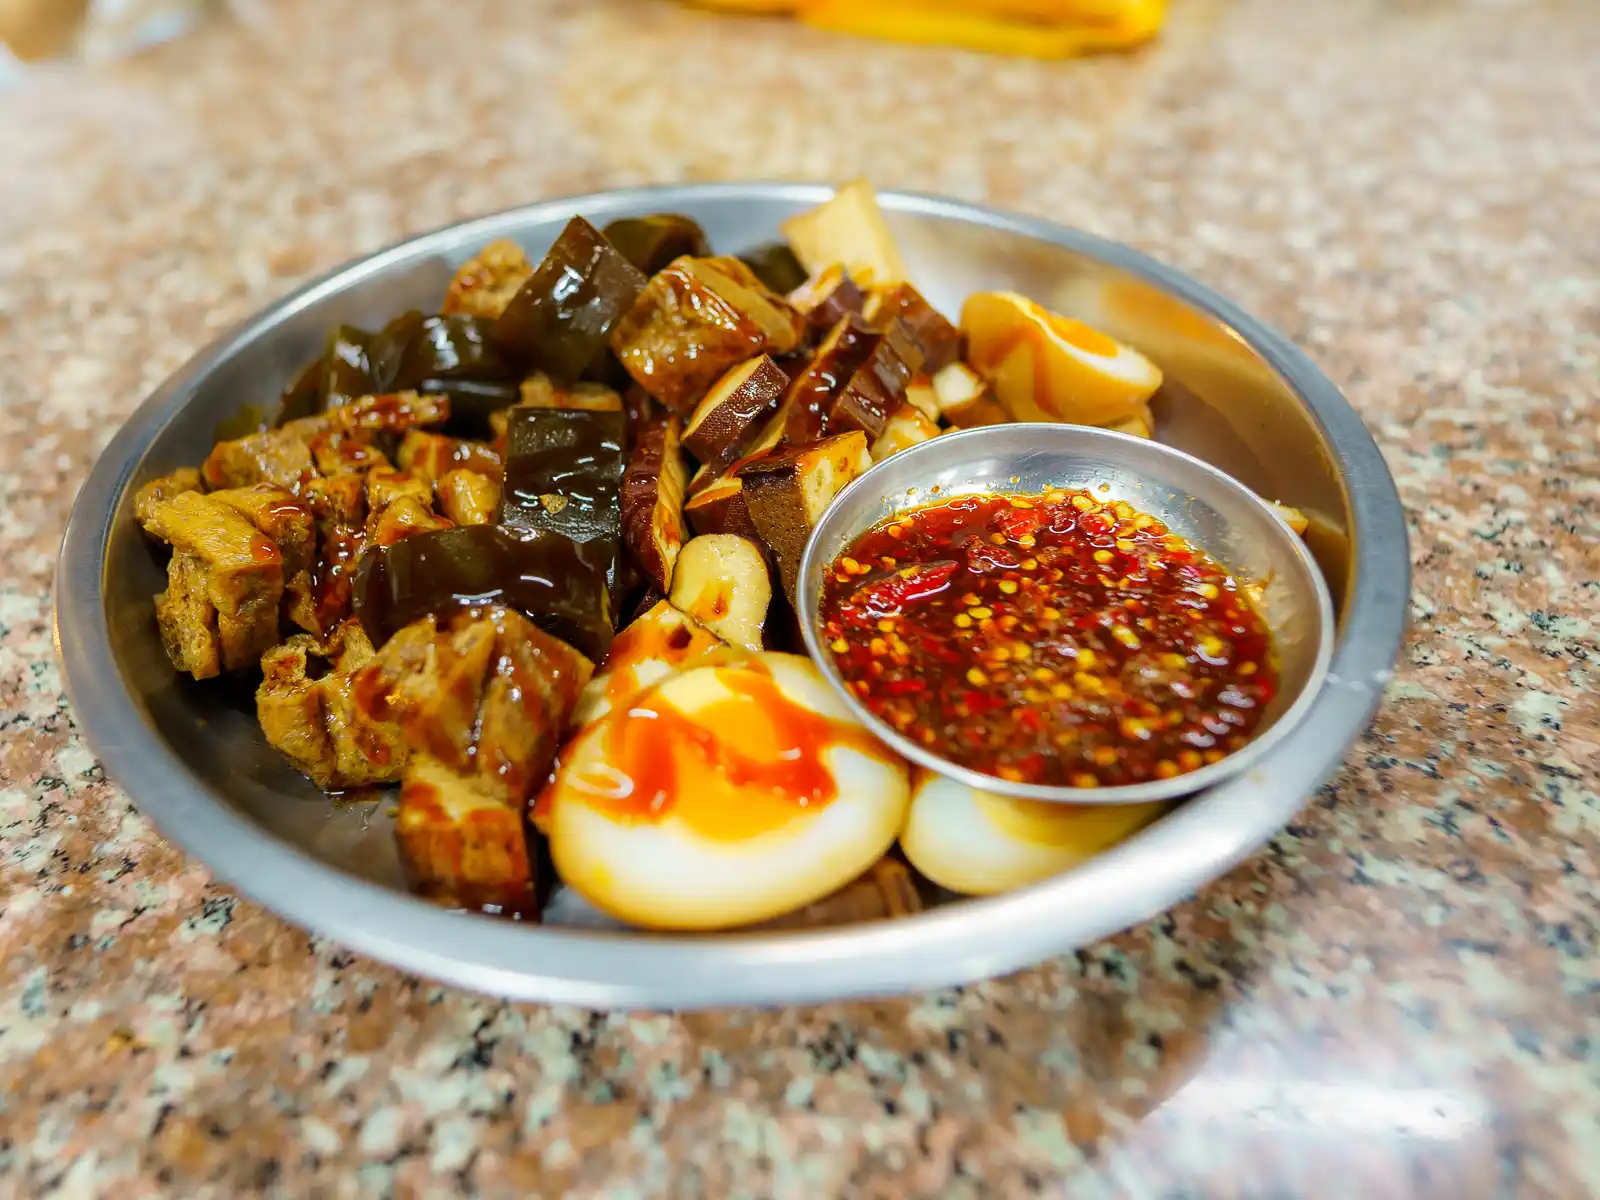 A classic sampler dish features egg, kept, tofu skin, and bean curd topped in thick soy sauce.